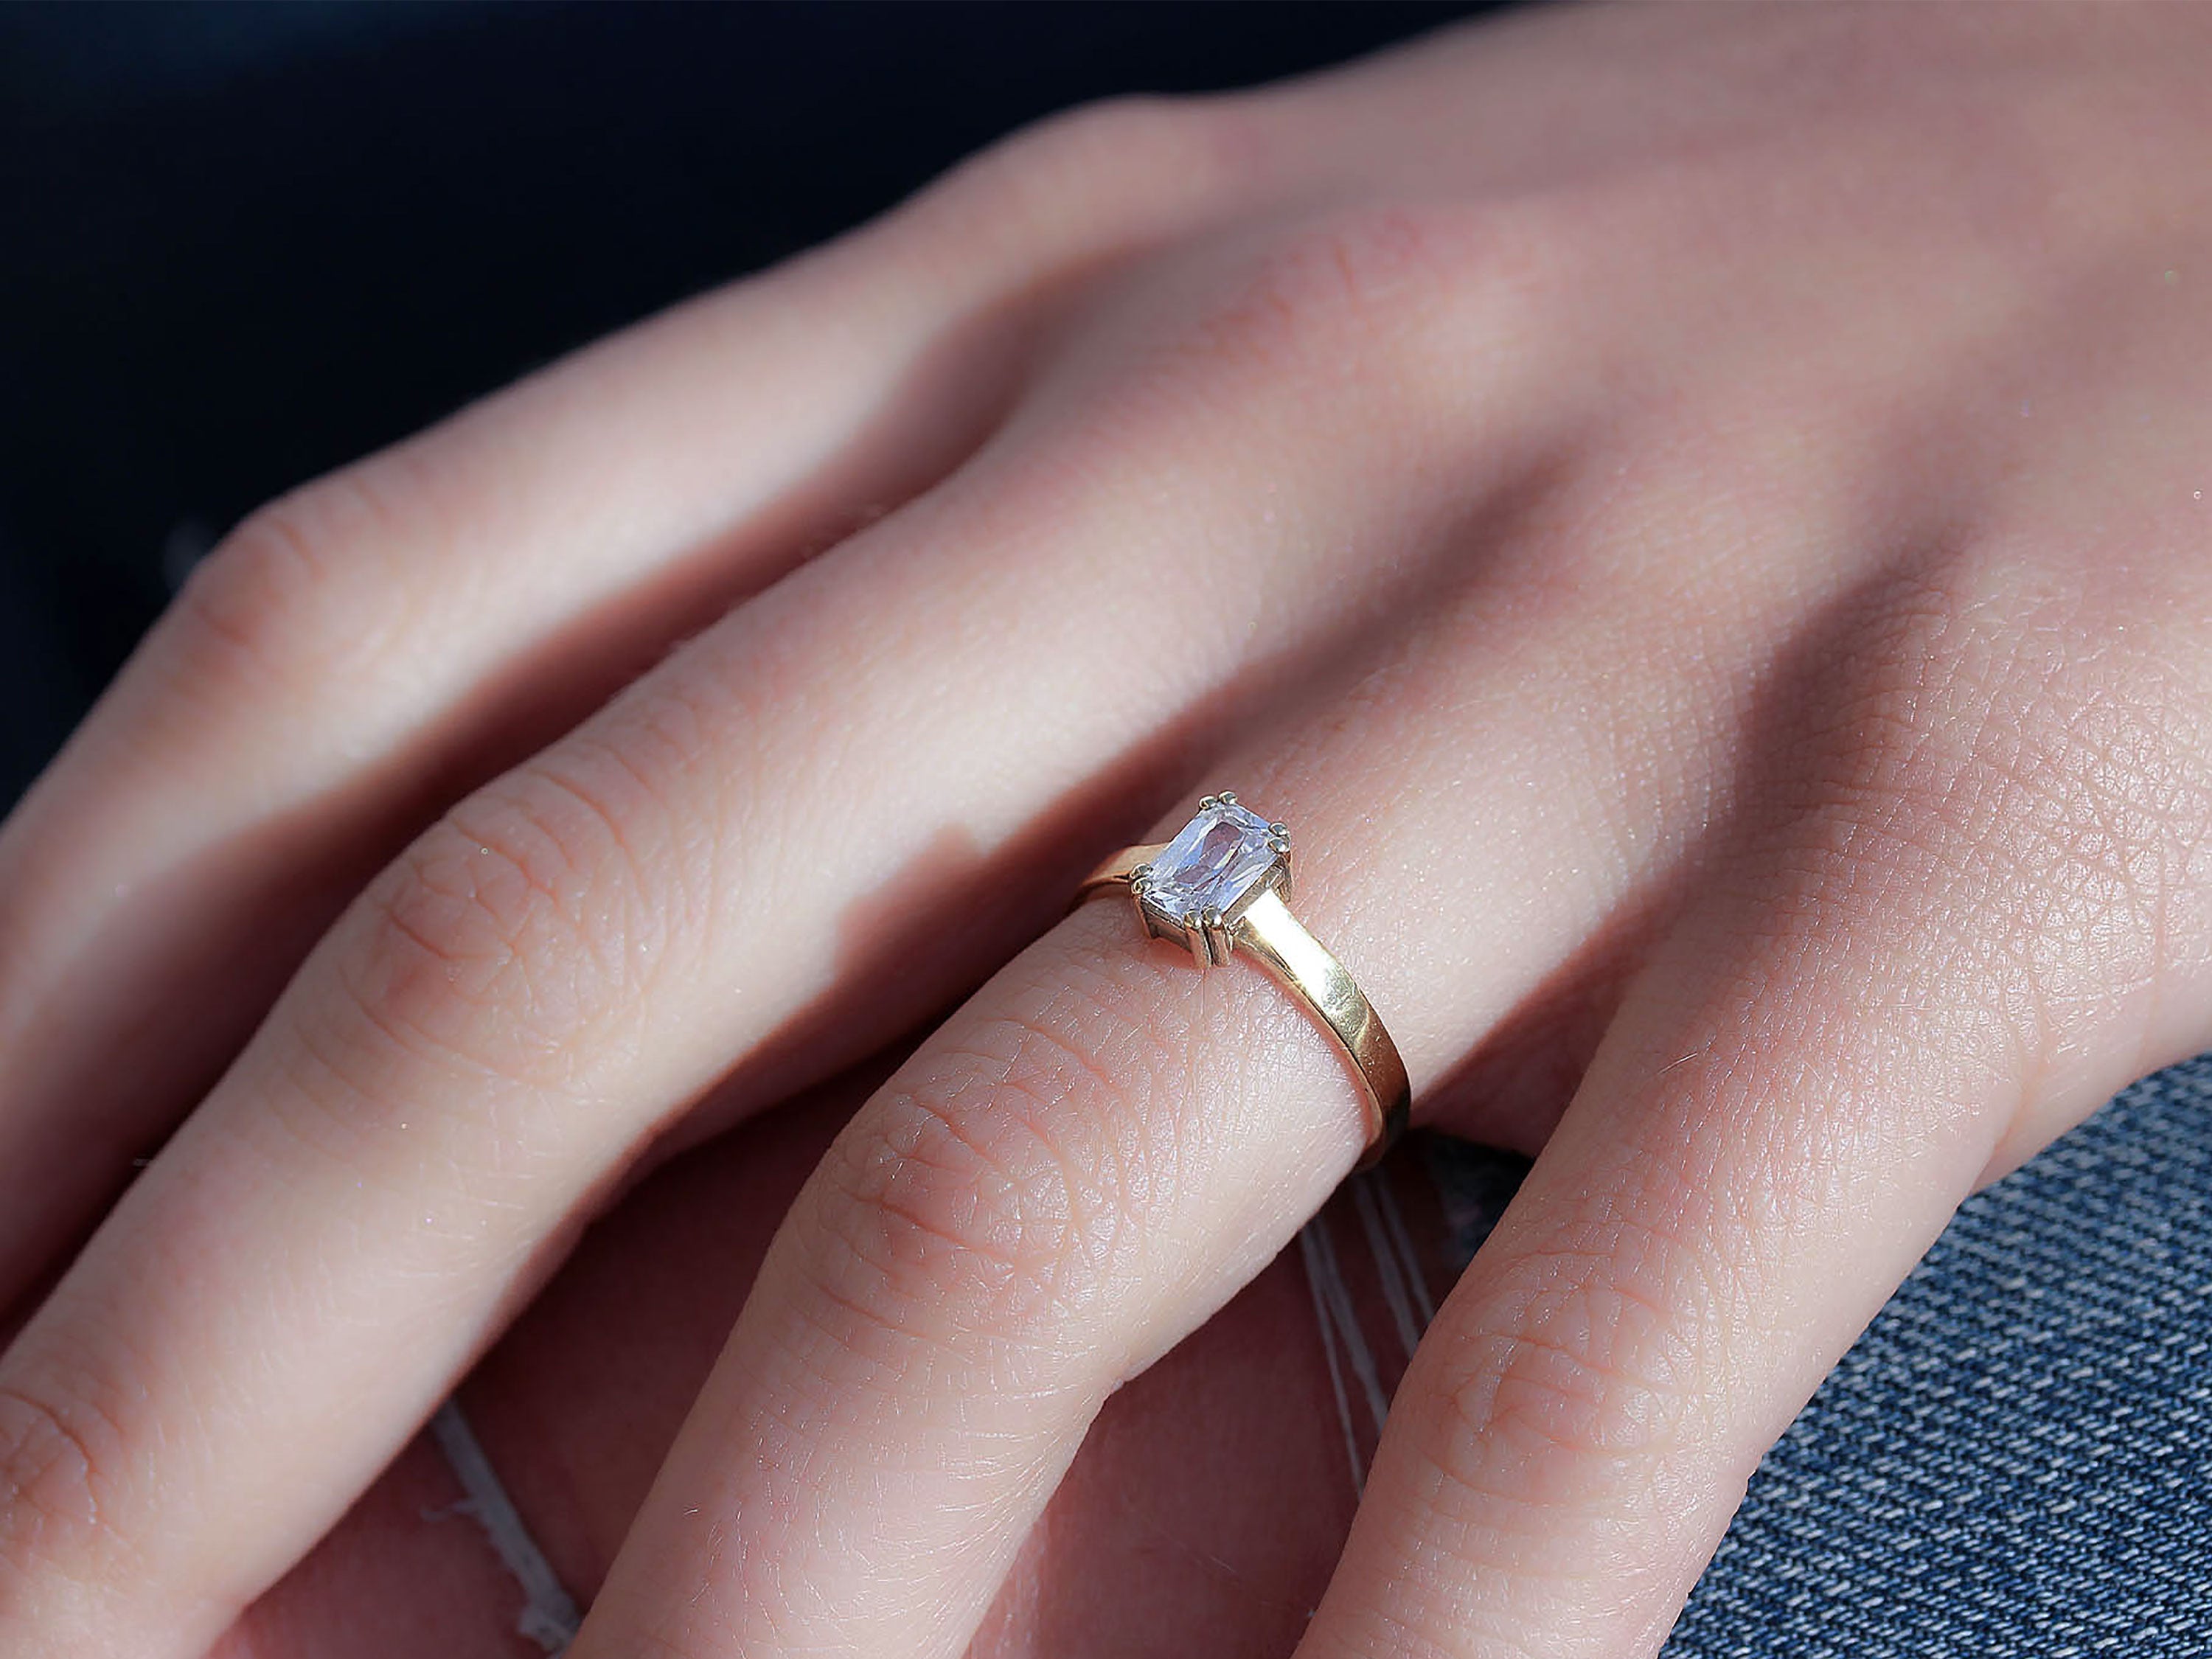 Mering Ring with a Lab Grown Emerald Cut Diamond